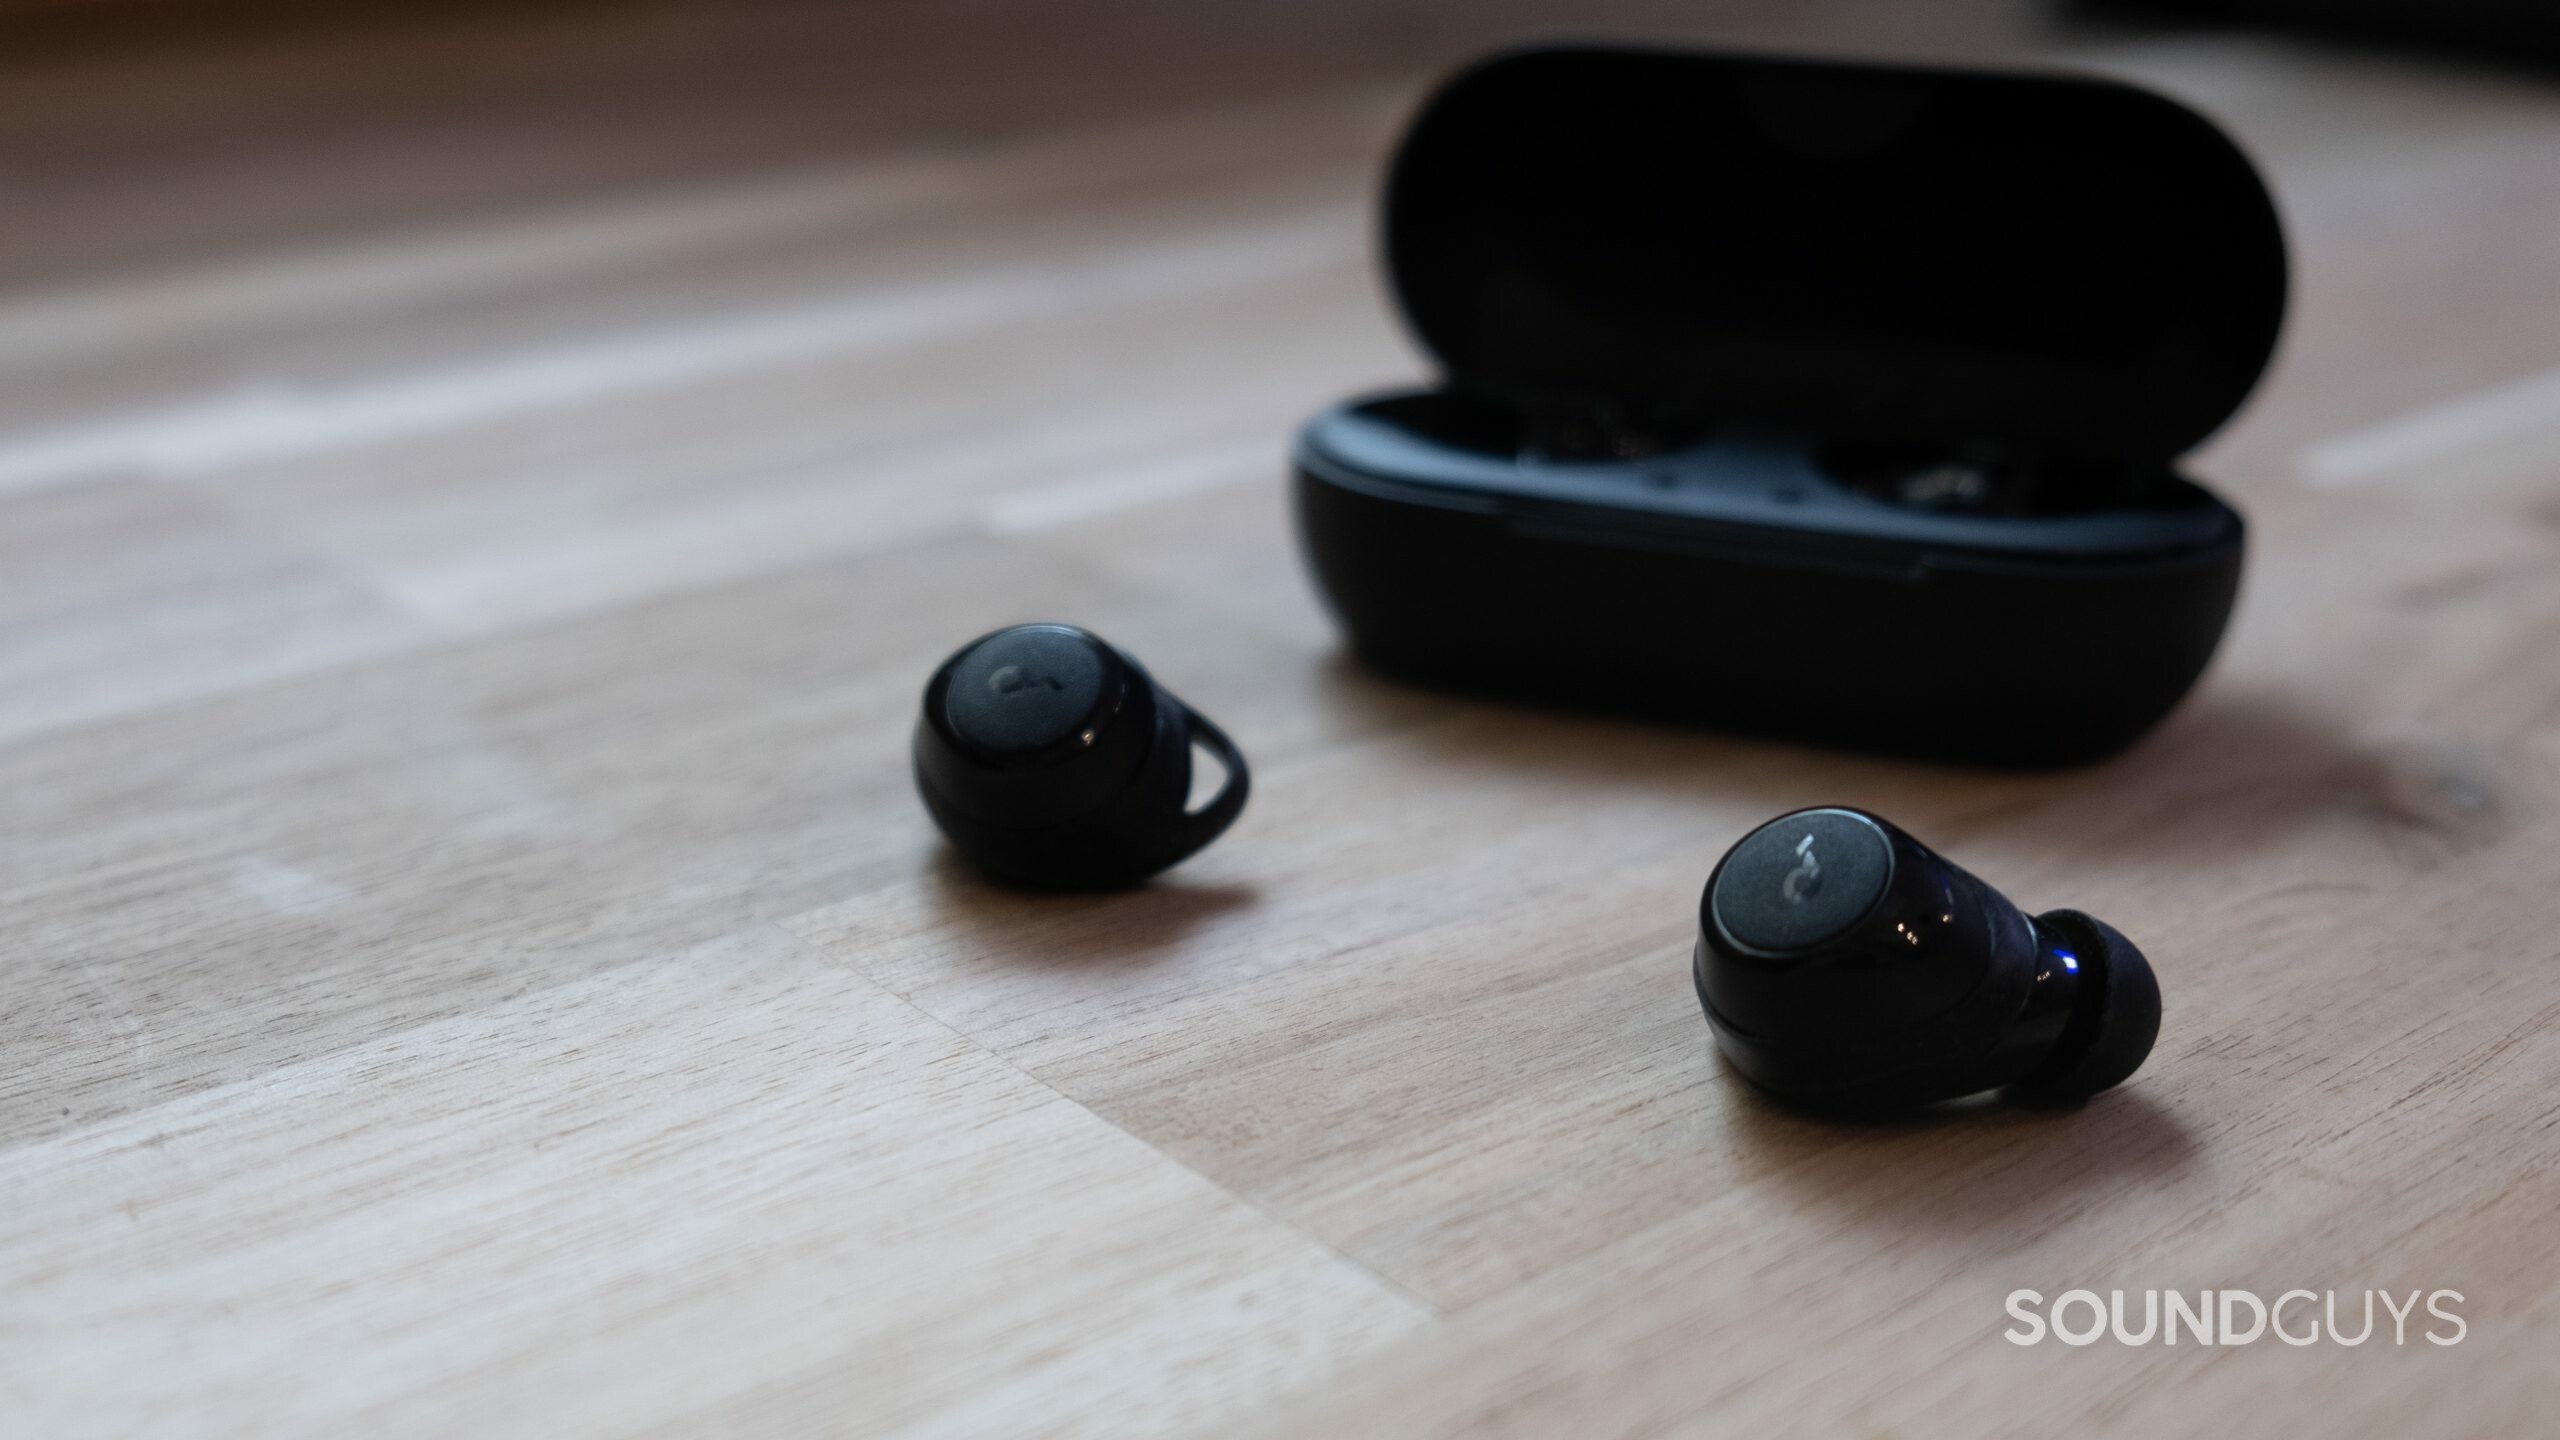 The Anker Soundcore Life A1 earbuds next to their case sit on a wood surface.